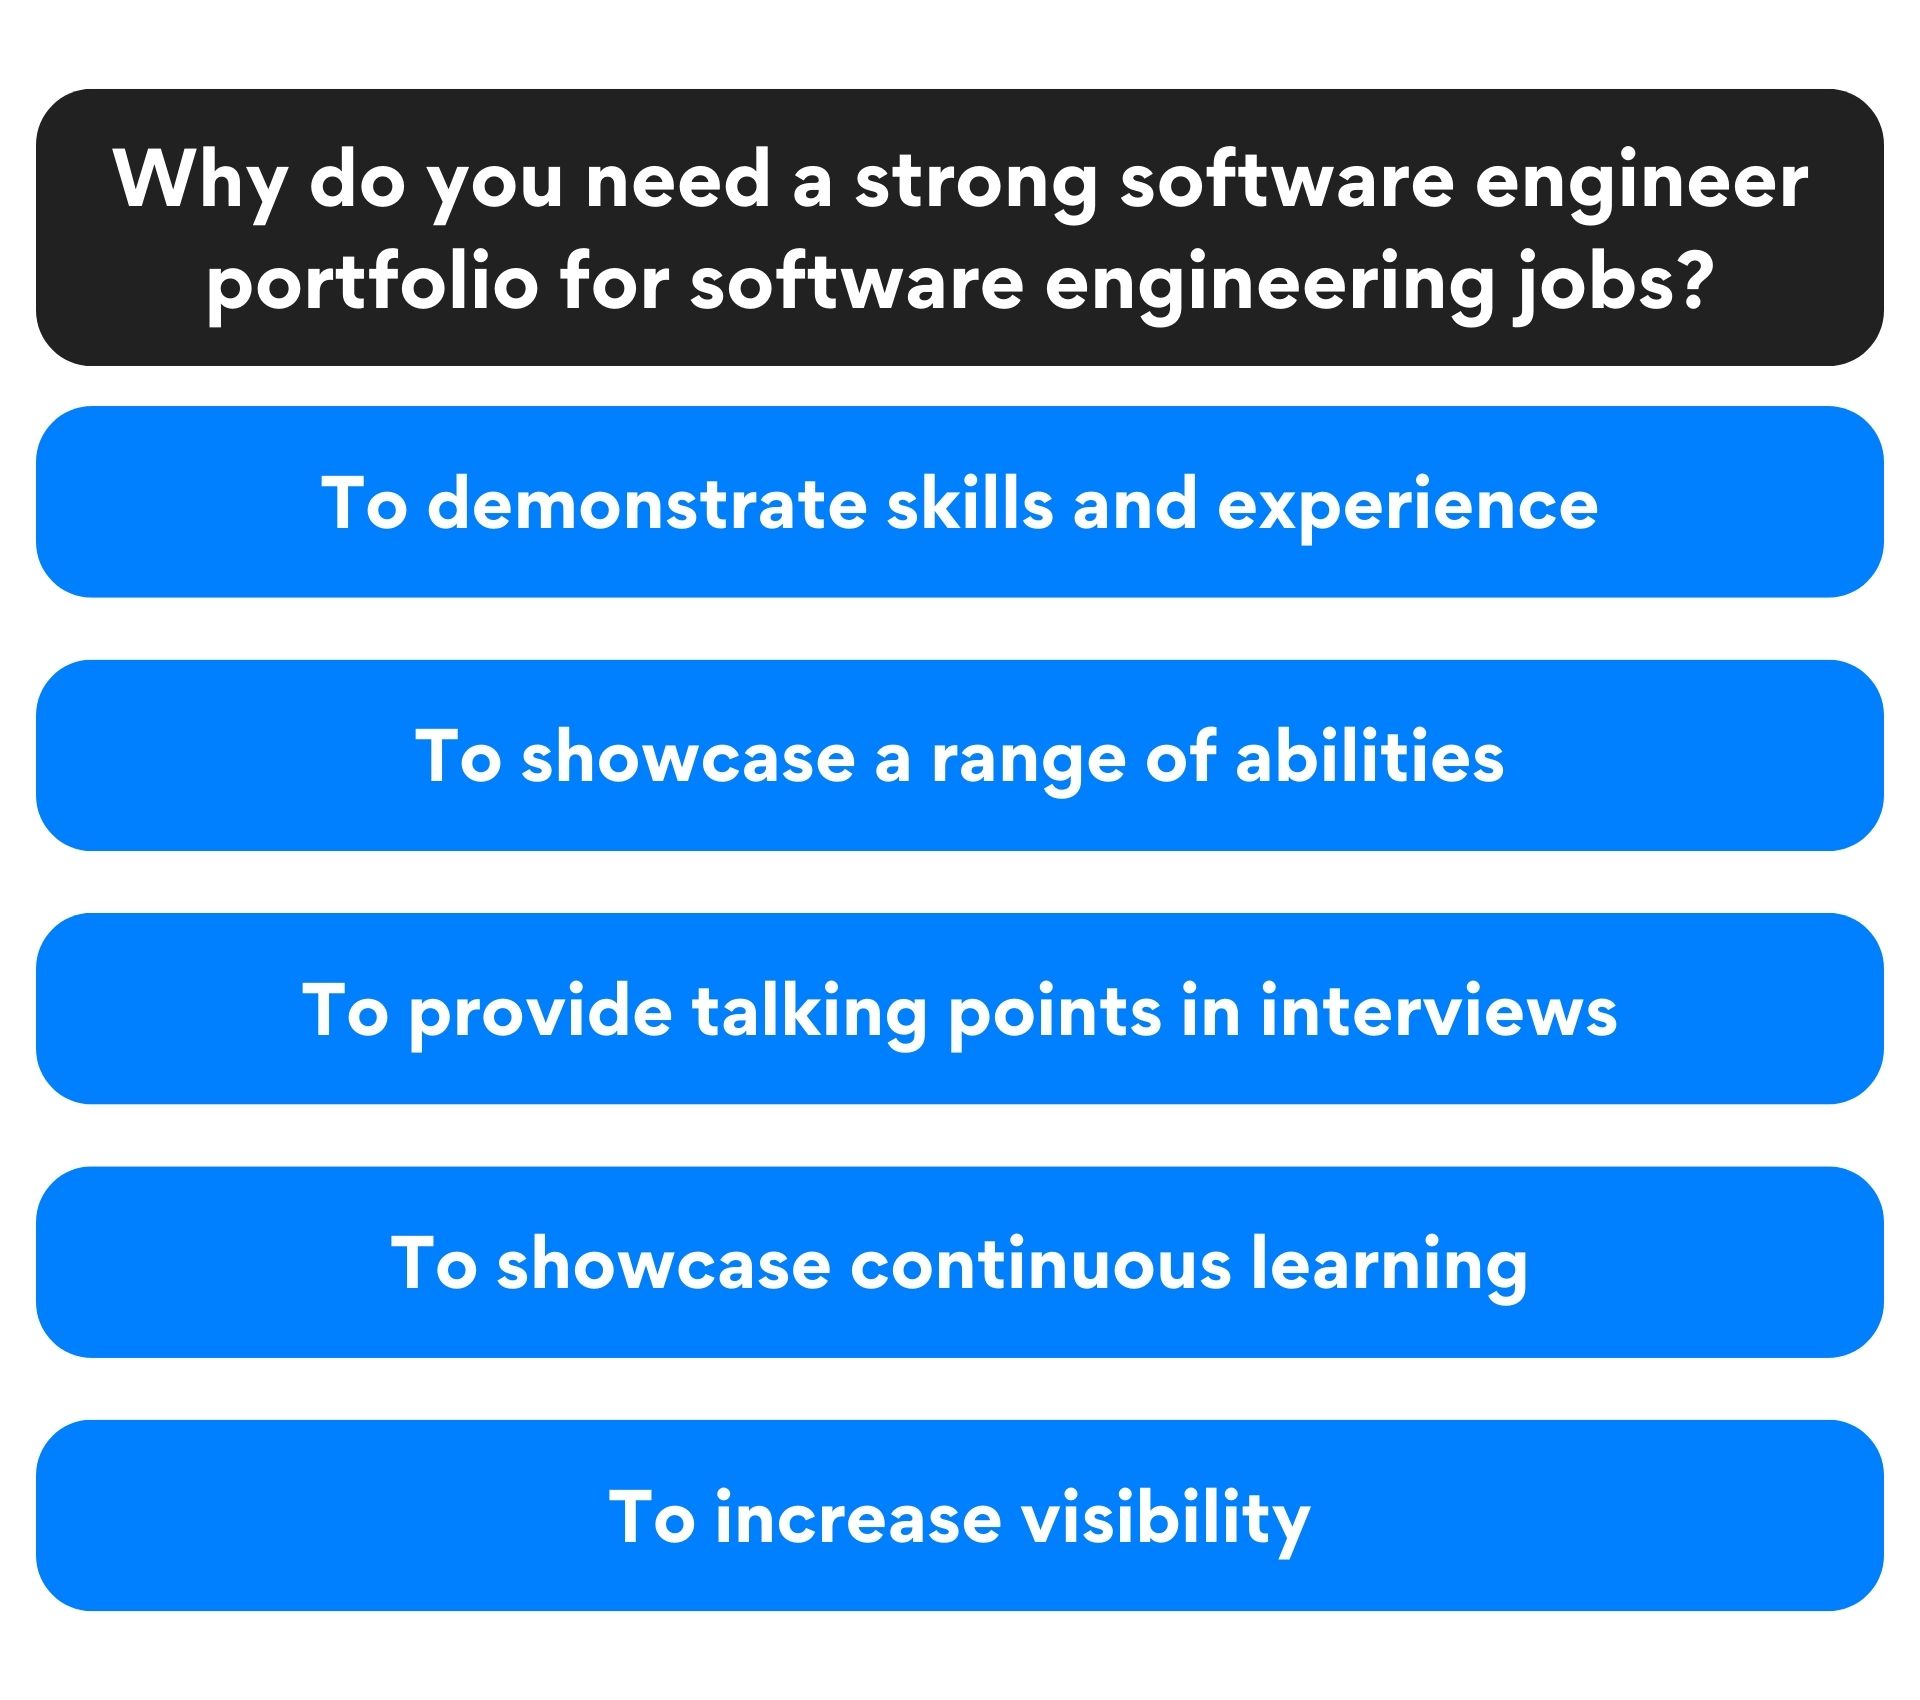 Why do you need a strong software engineering portfolio for software engineering jobs